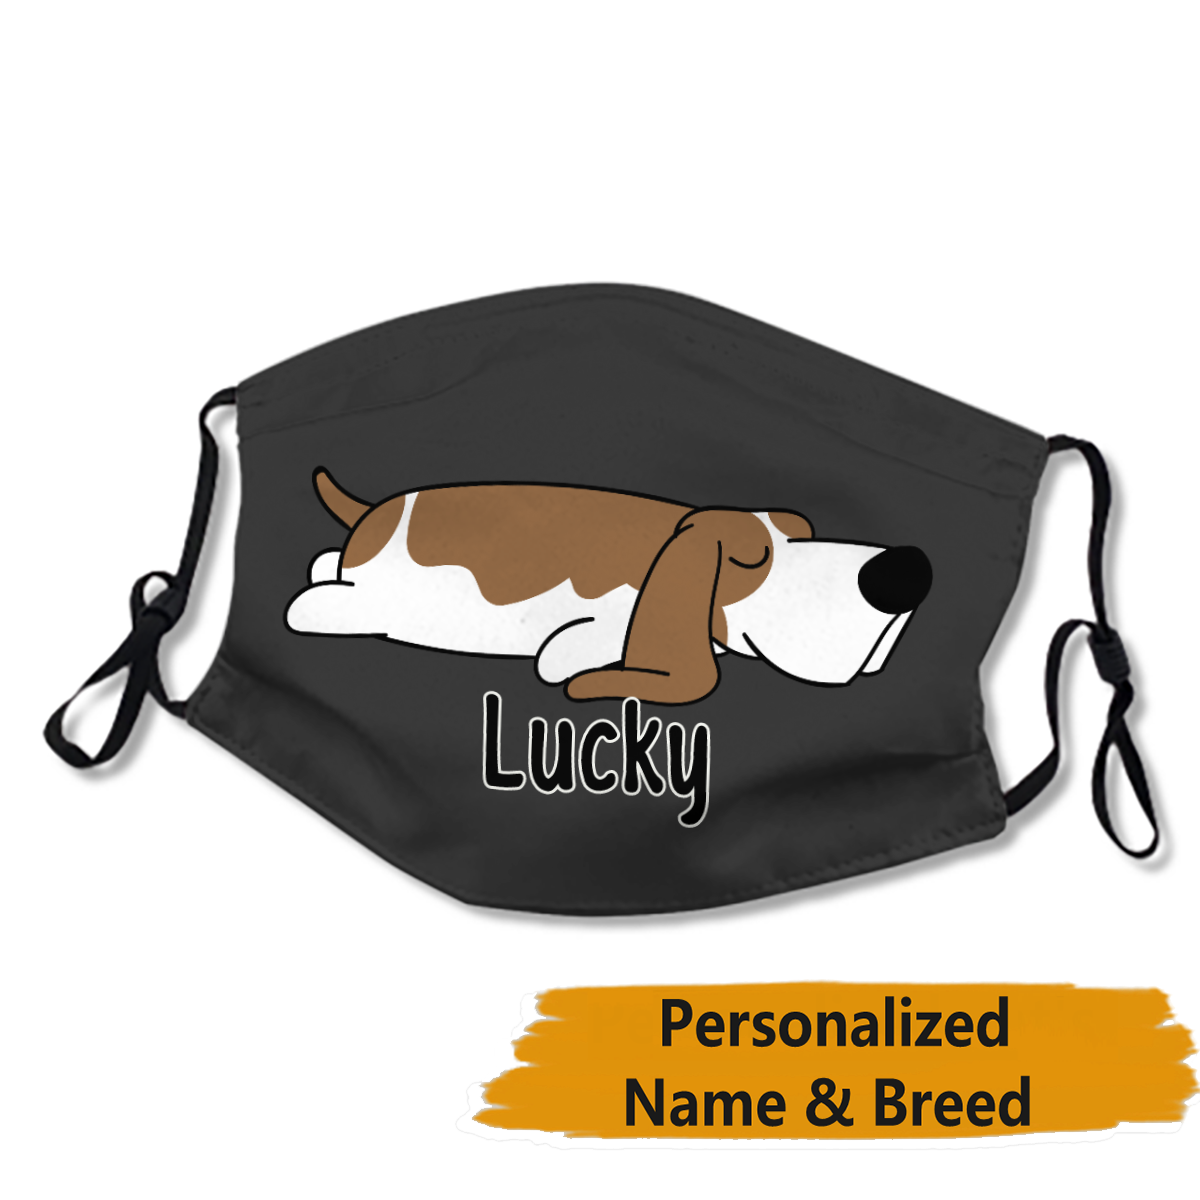 Personalized Dog's Name & Breed Face Mask No.6